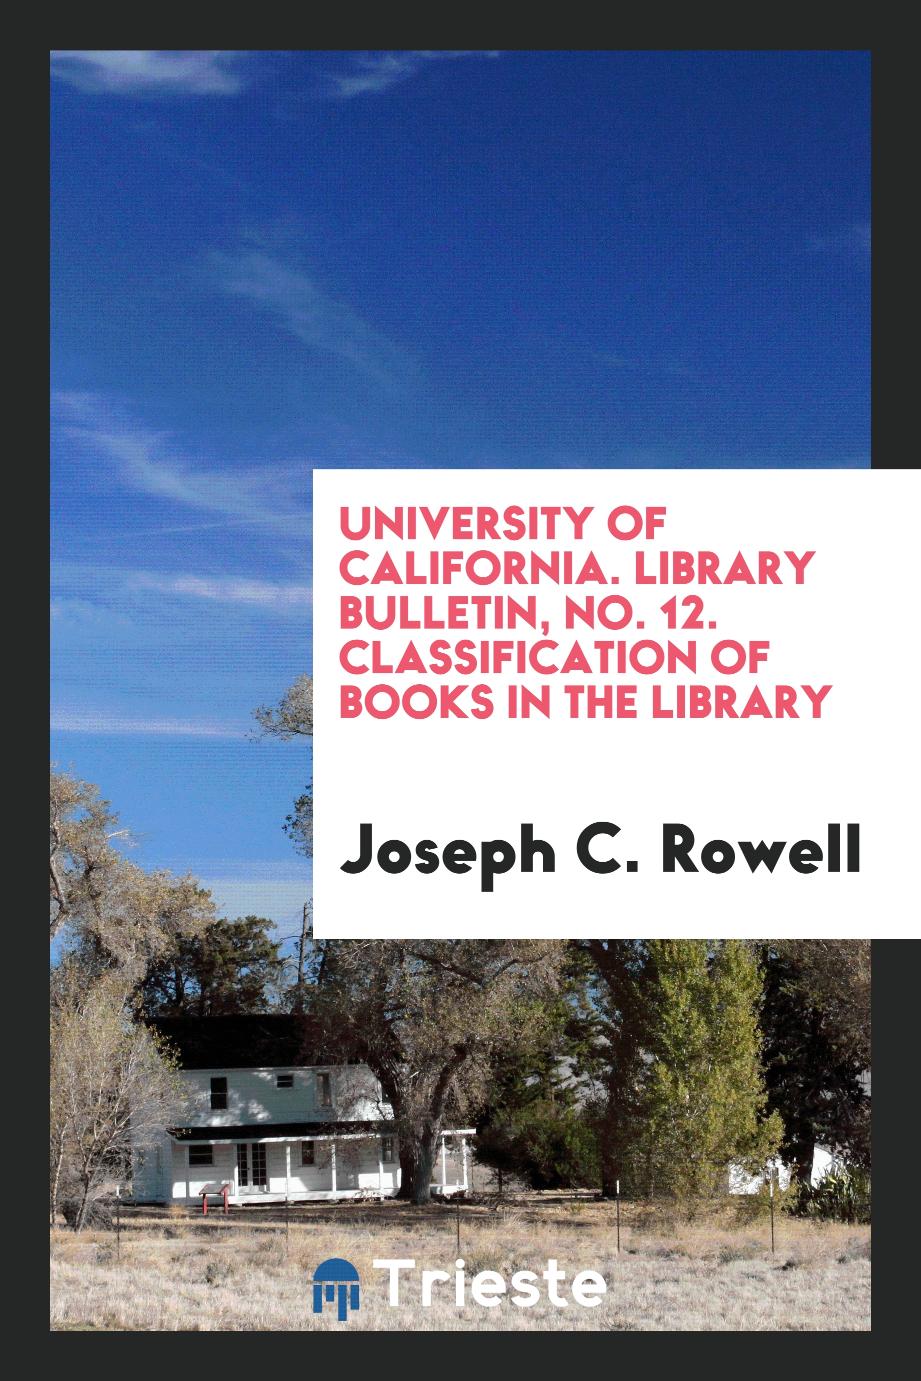 University of California. Library bulletin, No. 12. Classification of Books in the Library